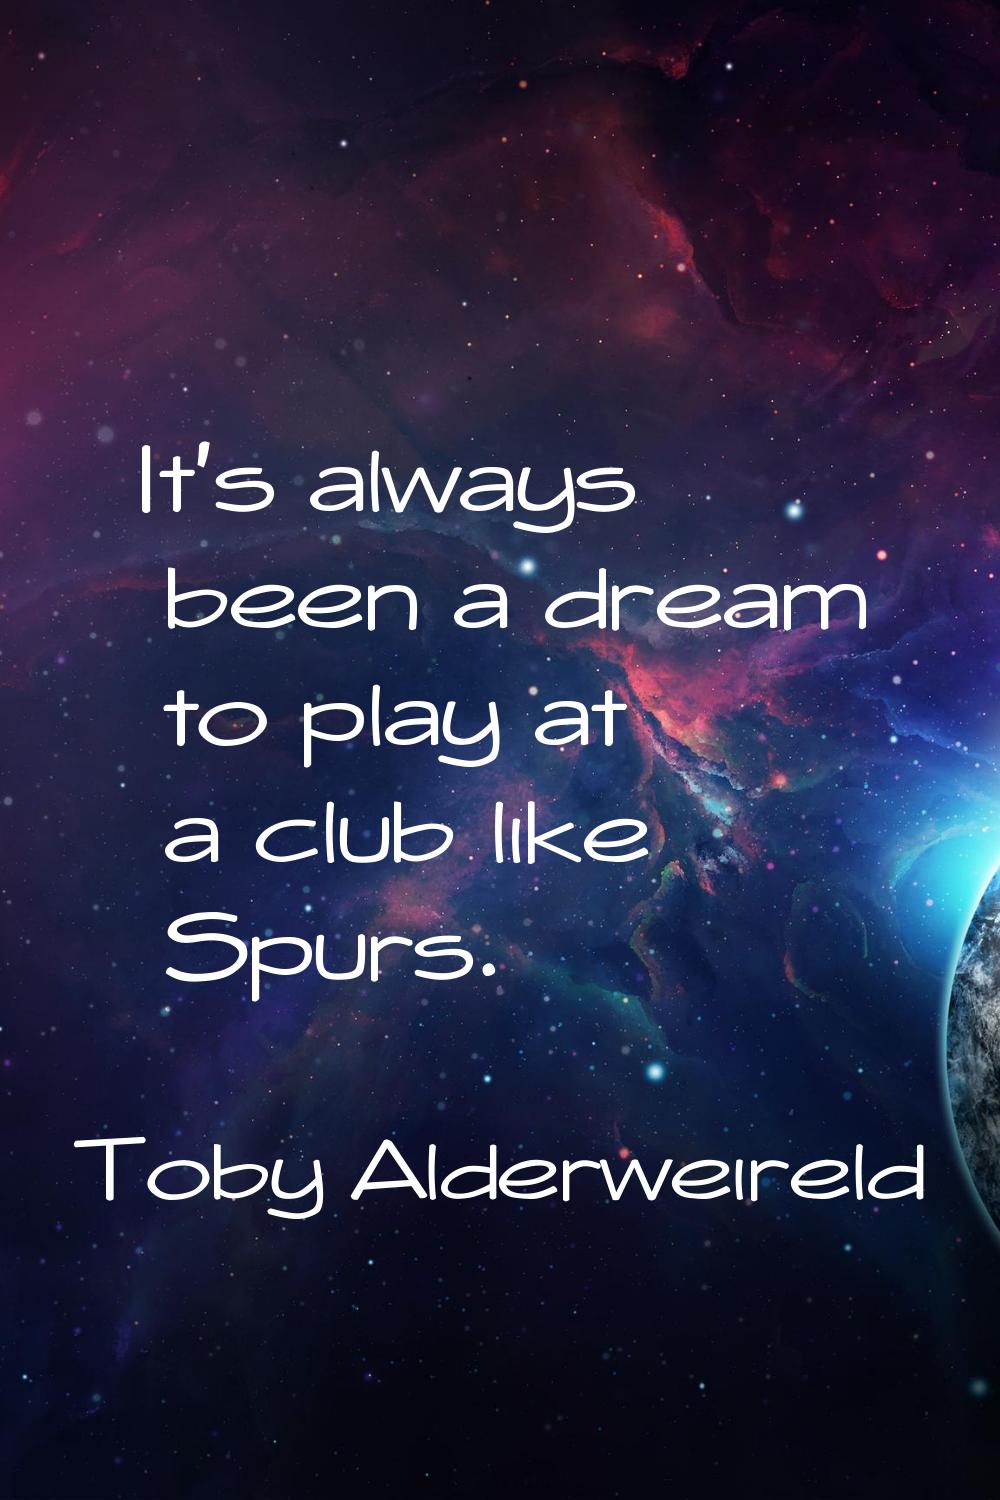 It's always been a dream to play at a club like Spurs.